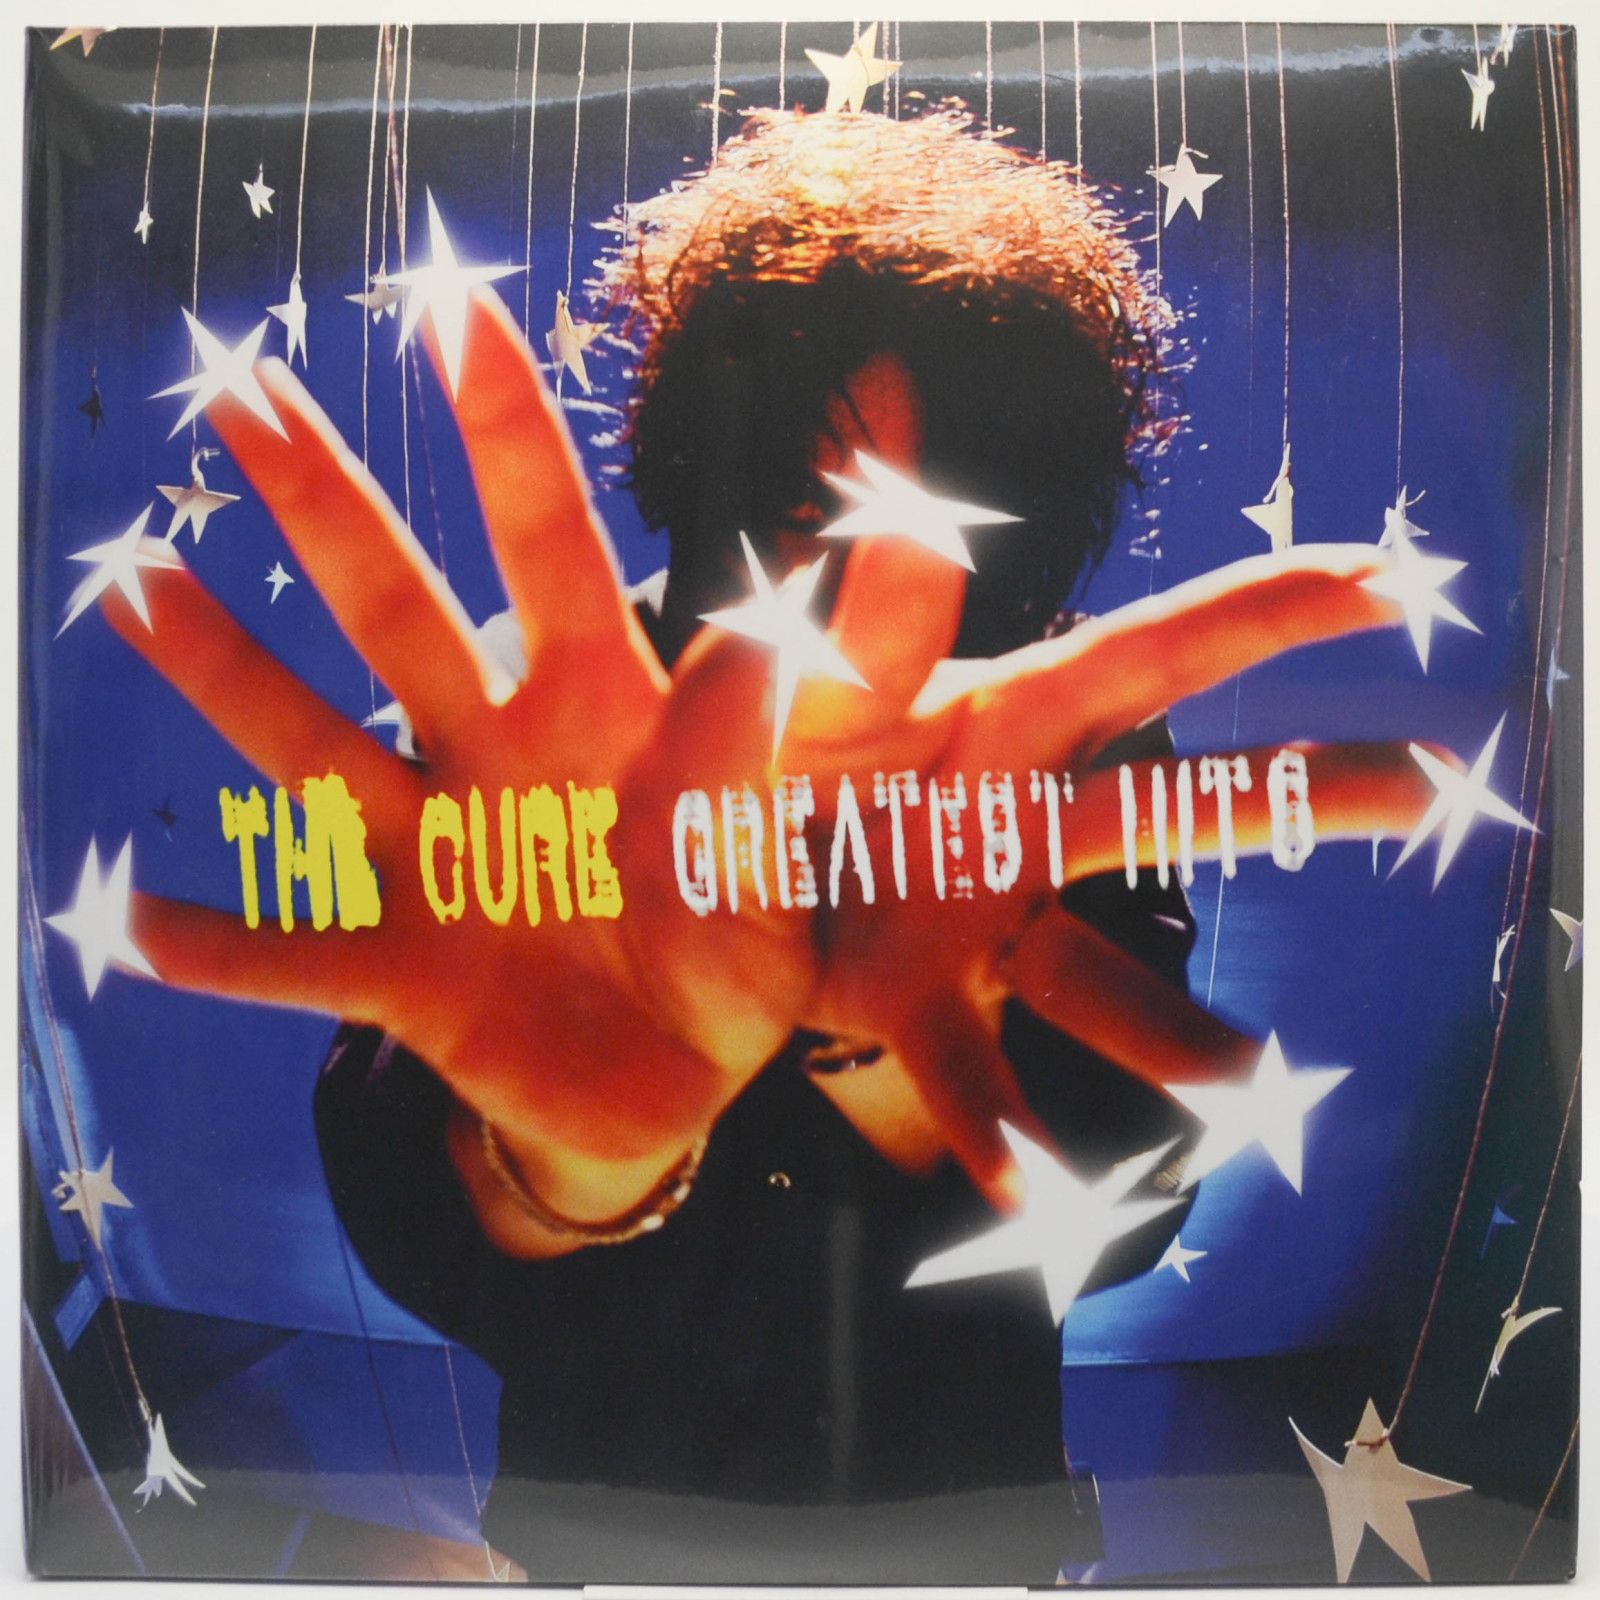 Cure — Greatest Hits (2LP), 2001